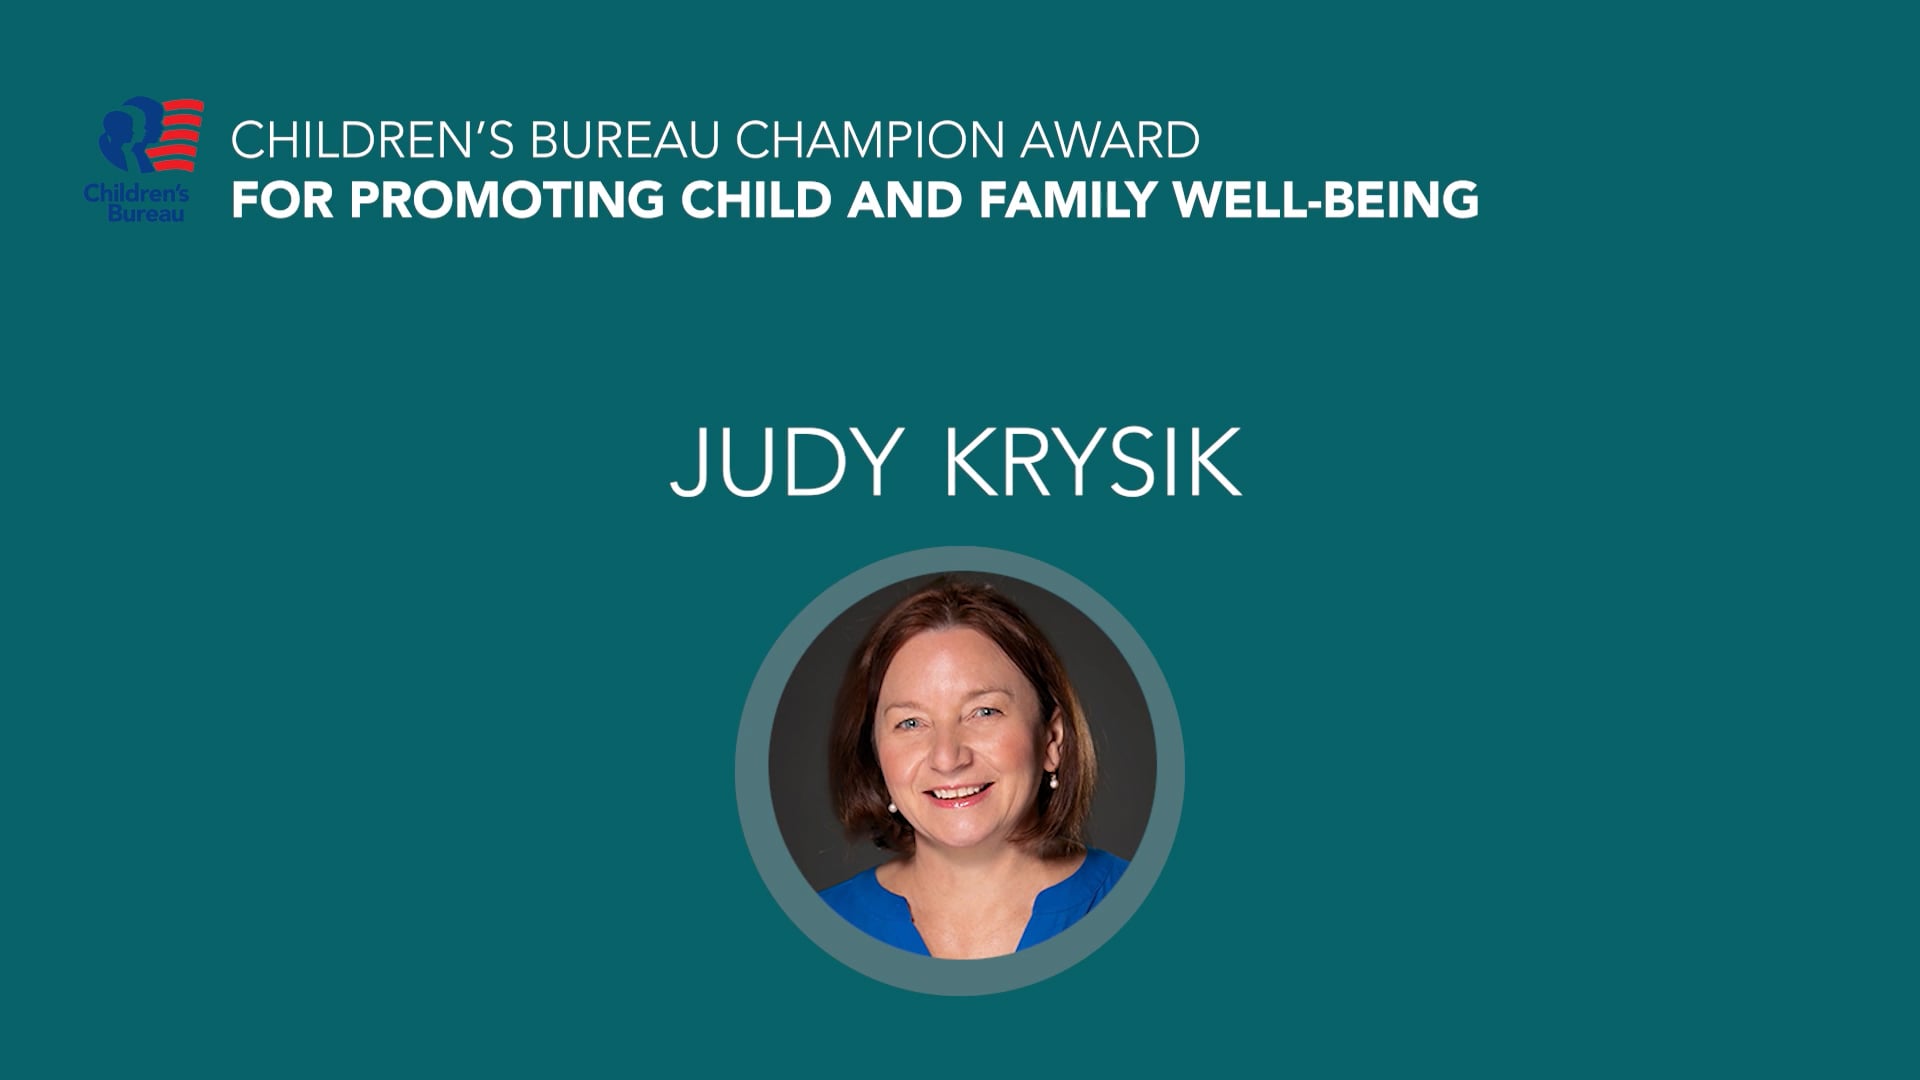 Click to watch the Judy Krysik video